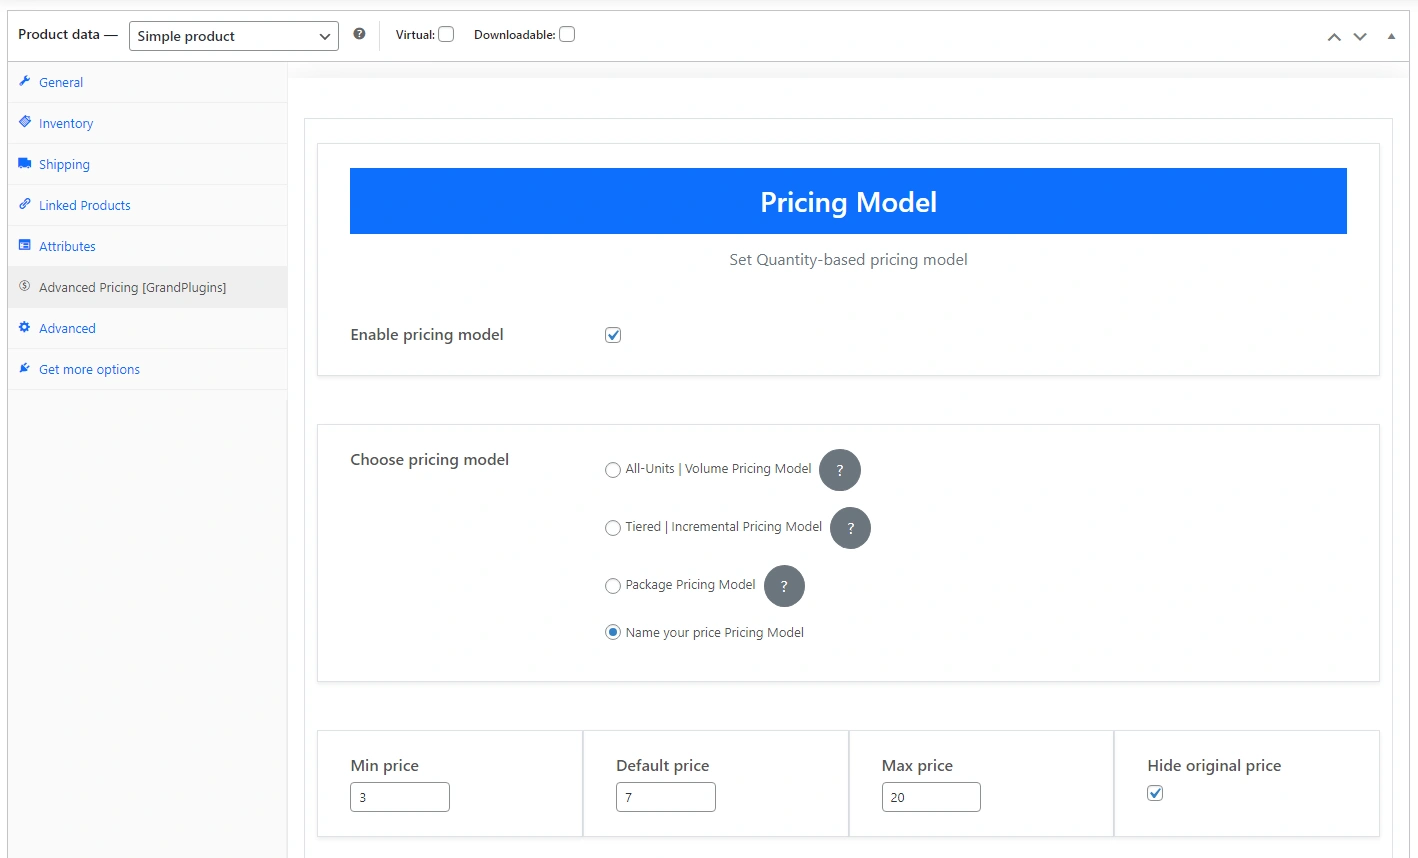 Name your price mode in WooComerce - Edit settings